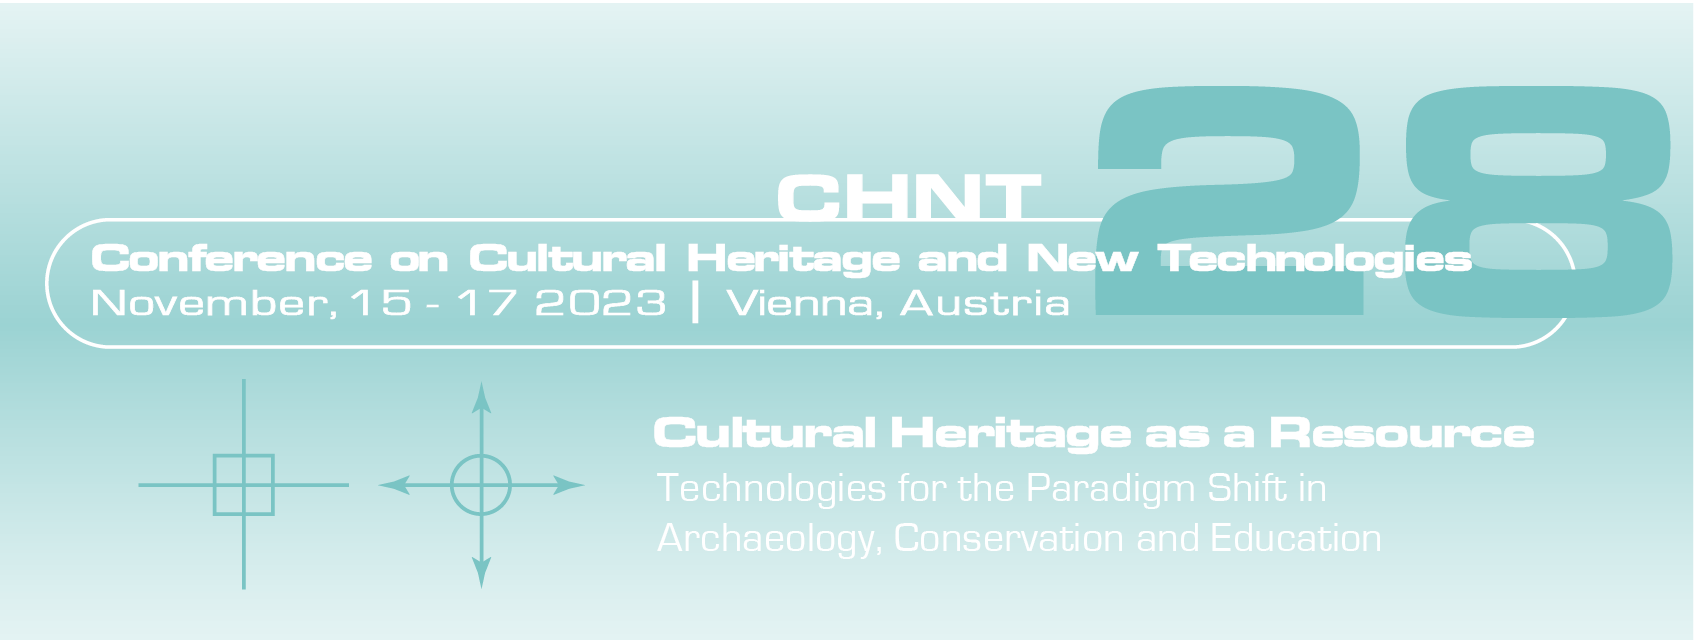 International Conference on Cultural Heritage and New Technologies